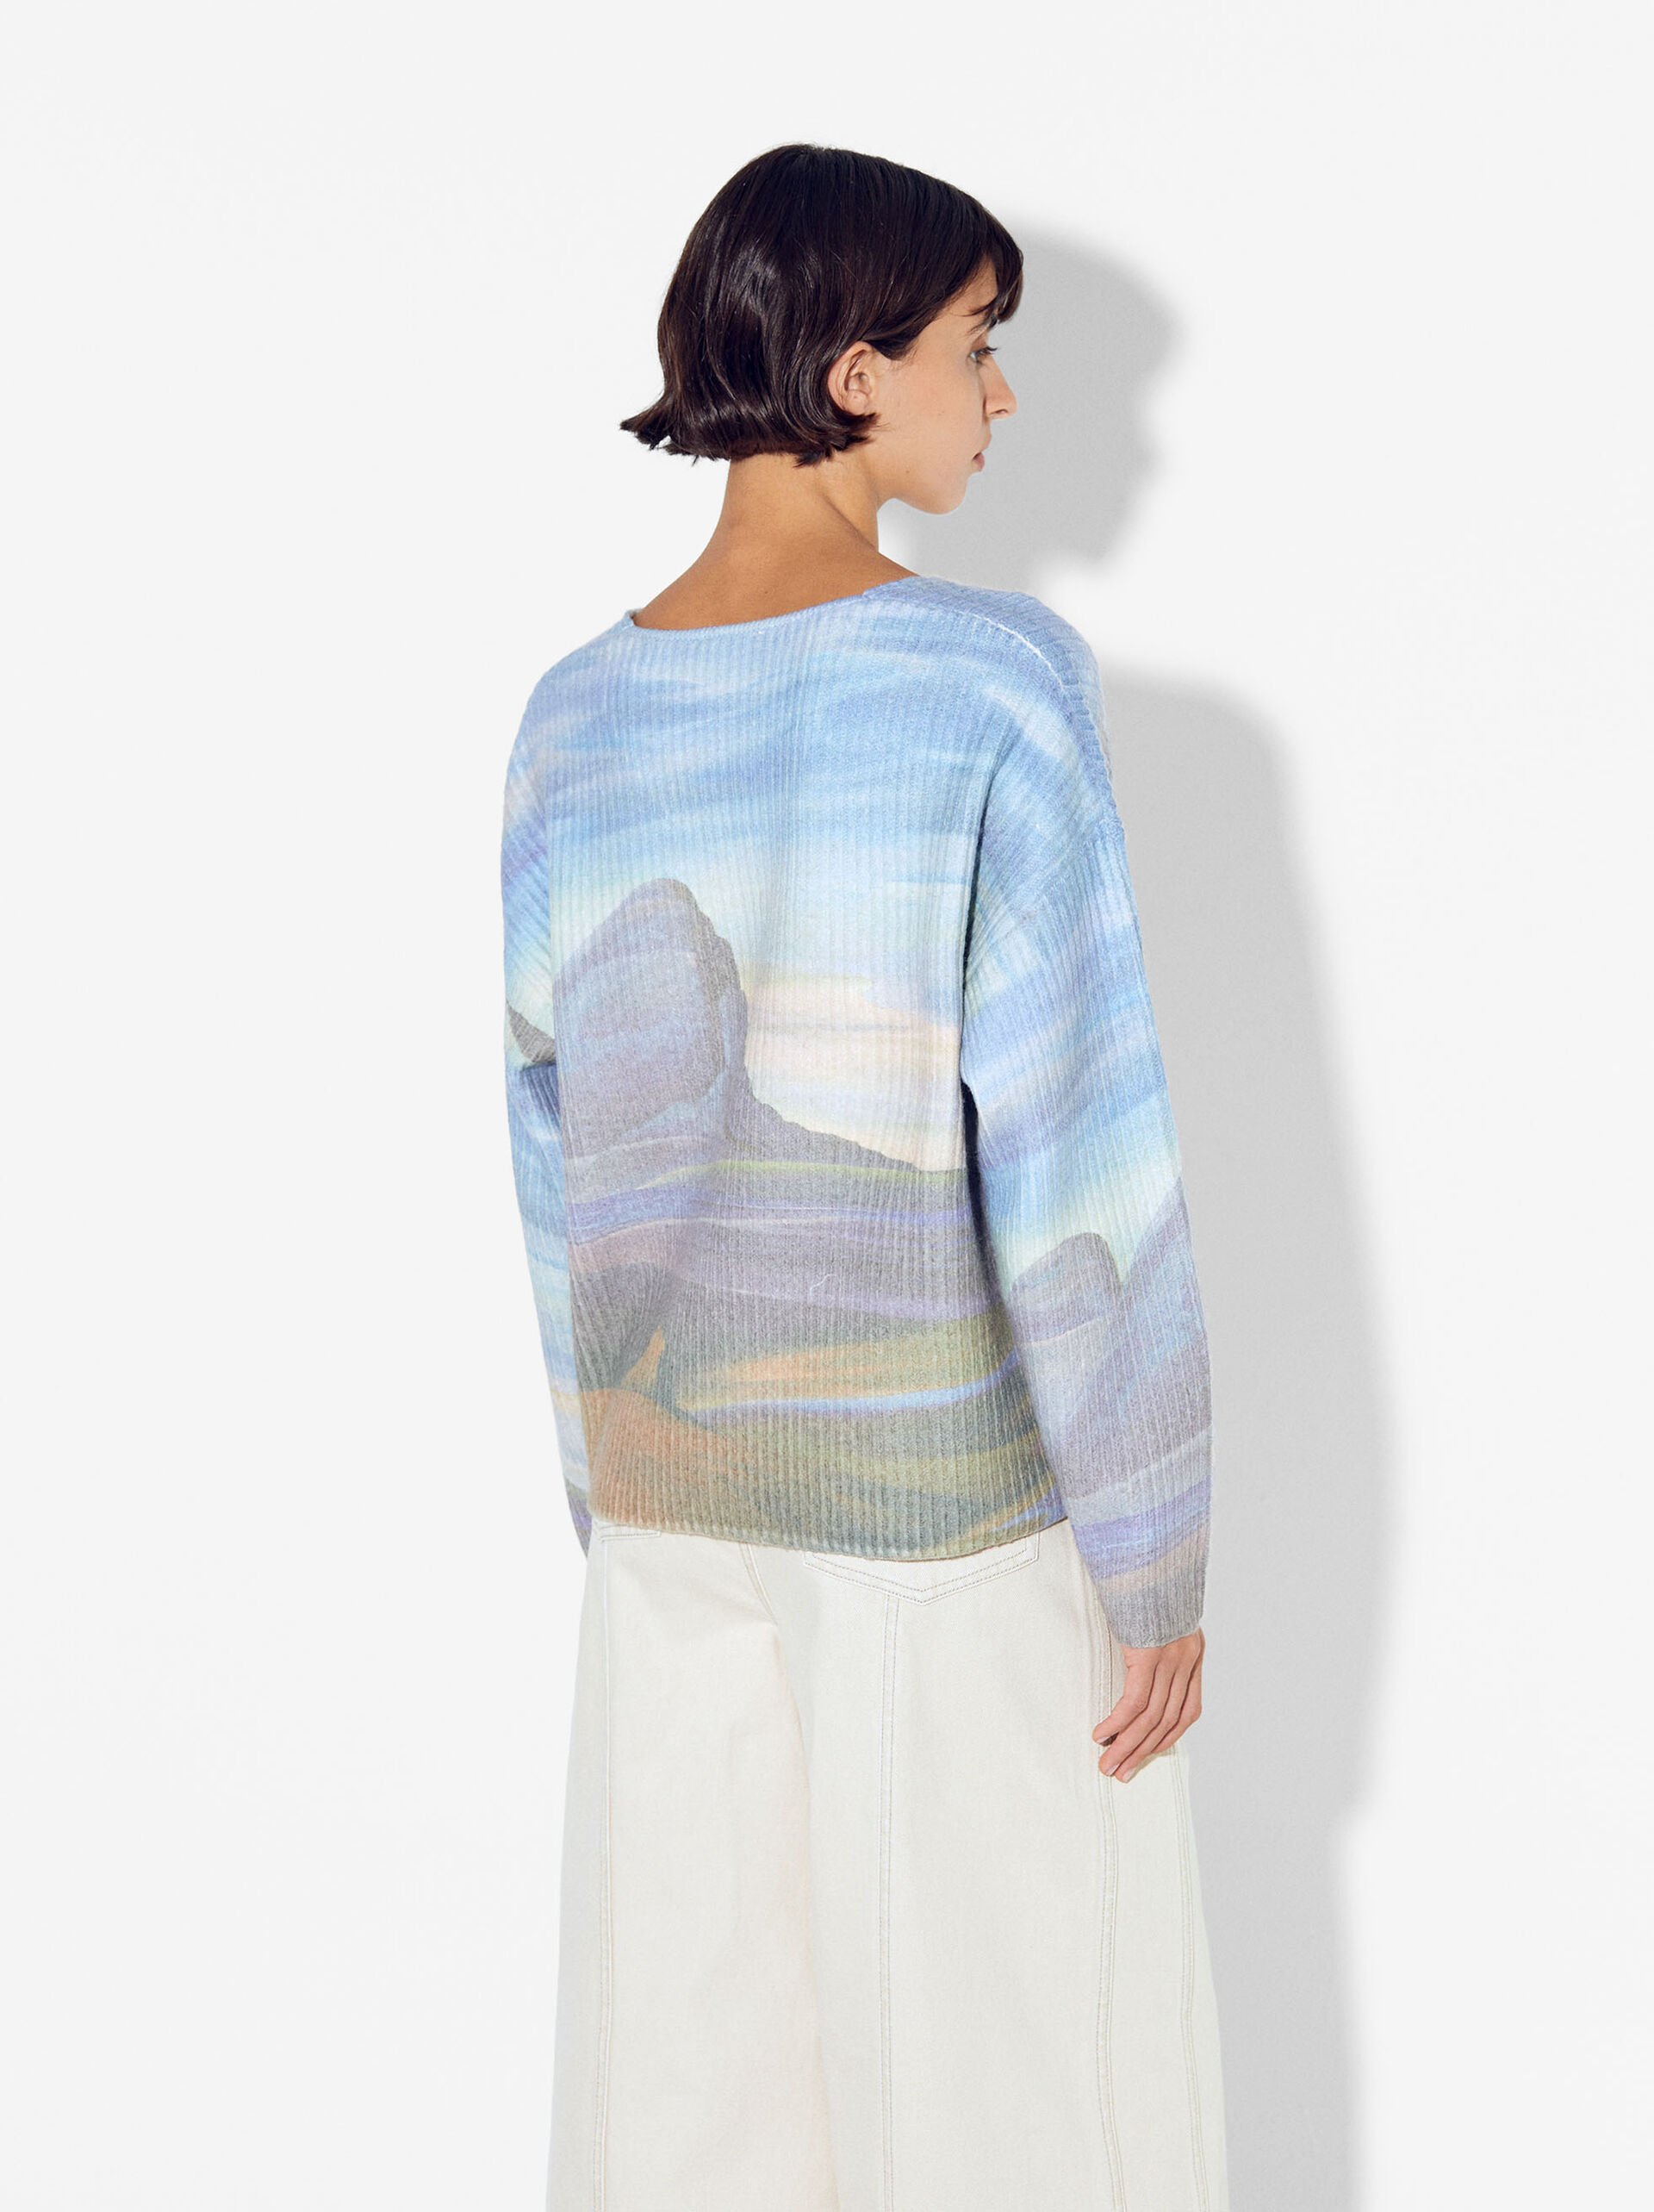 Printed Knit Sweater image number 3.0